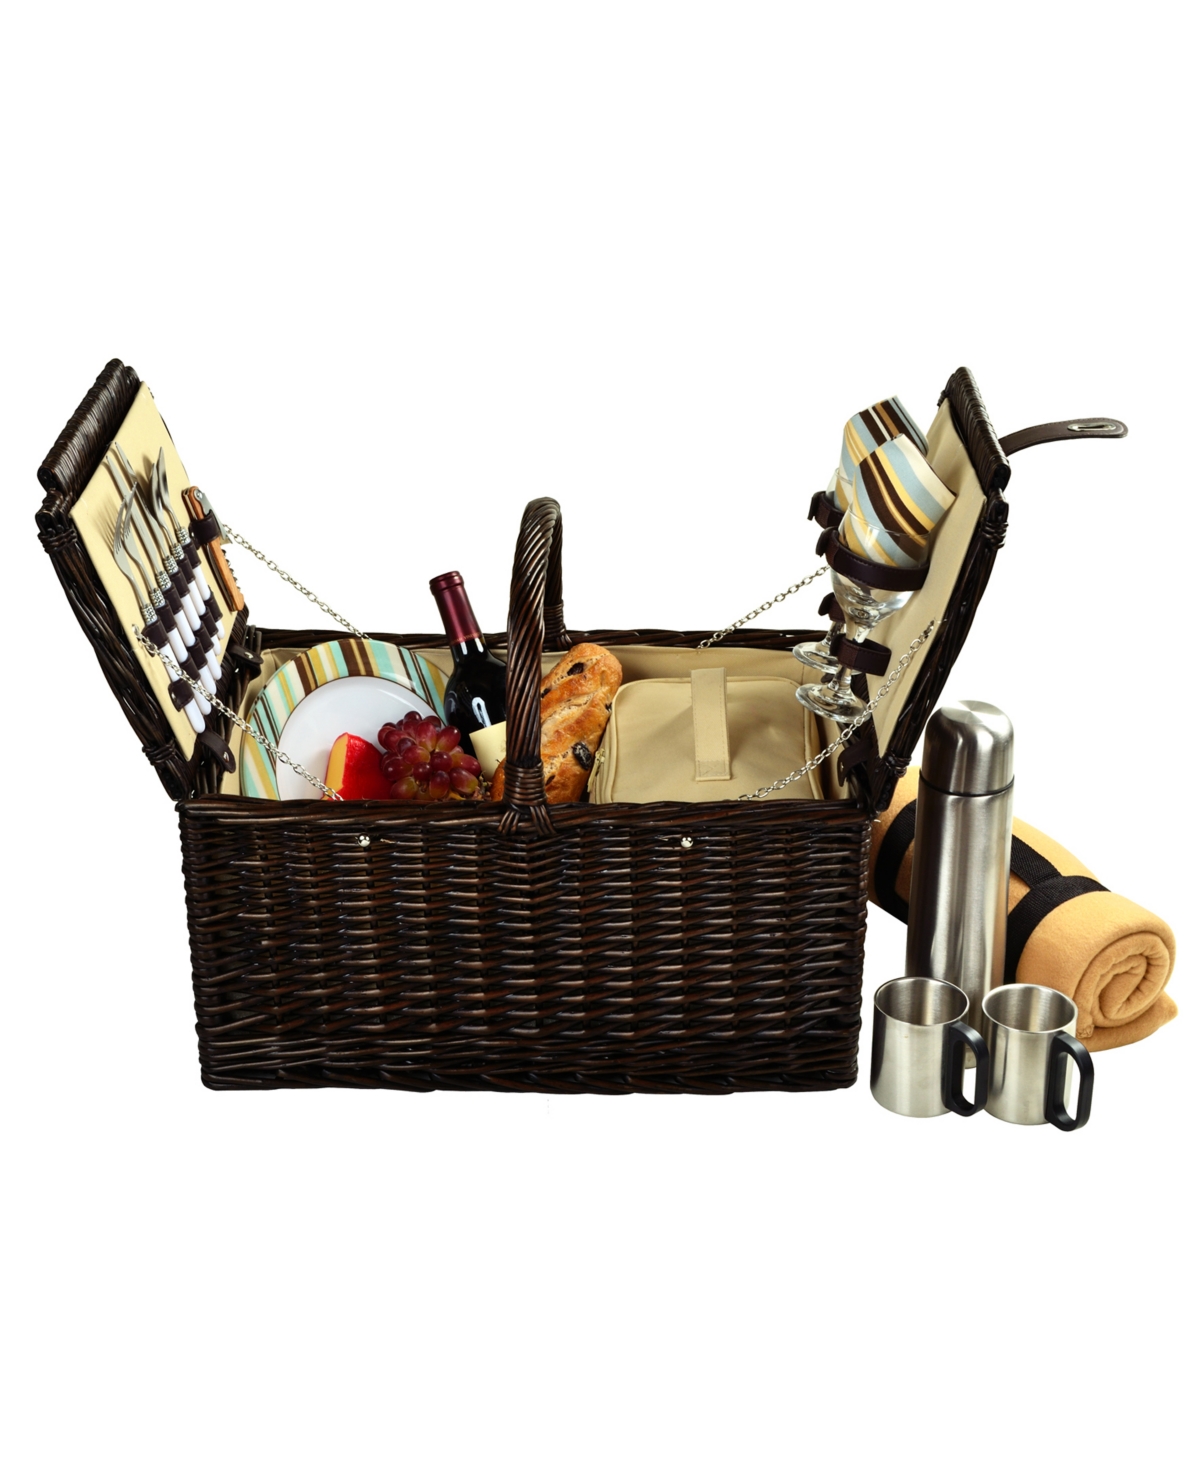 Surrey Willow Picnic Basket for 2 with Blanket and Coffee Set - Orange